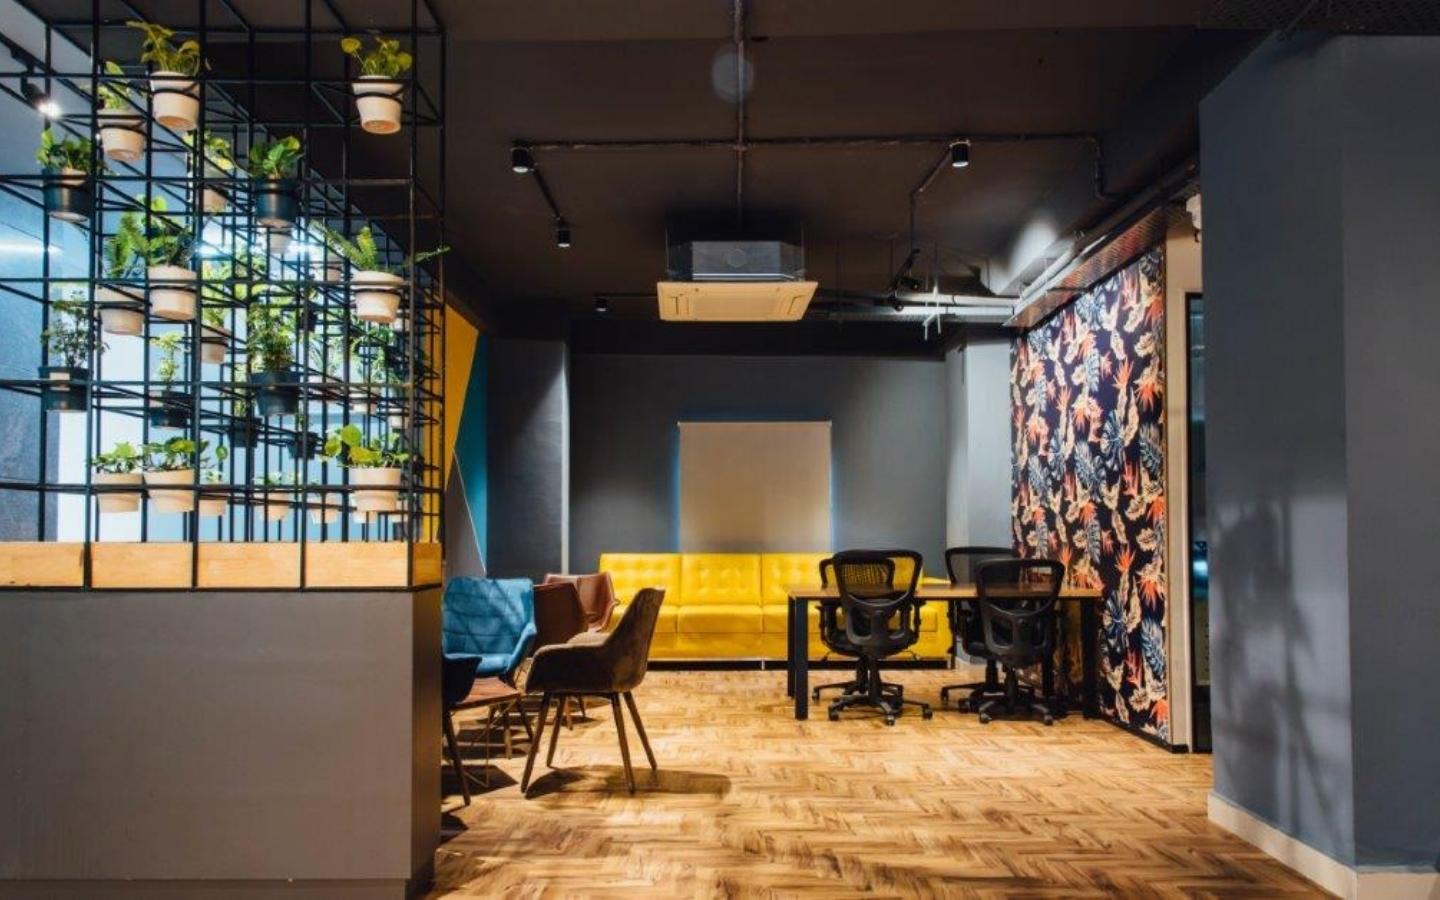 Why Are Small Cities In India Becoming Hotspots Of Co-Working Spaces?